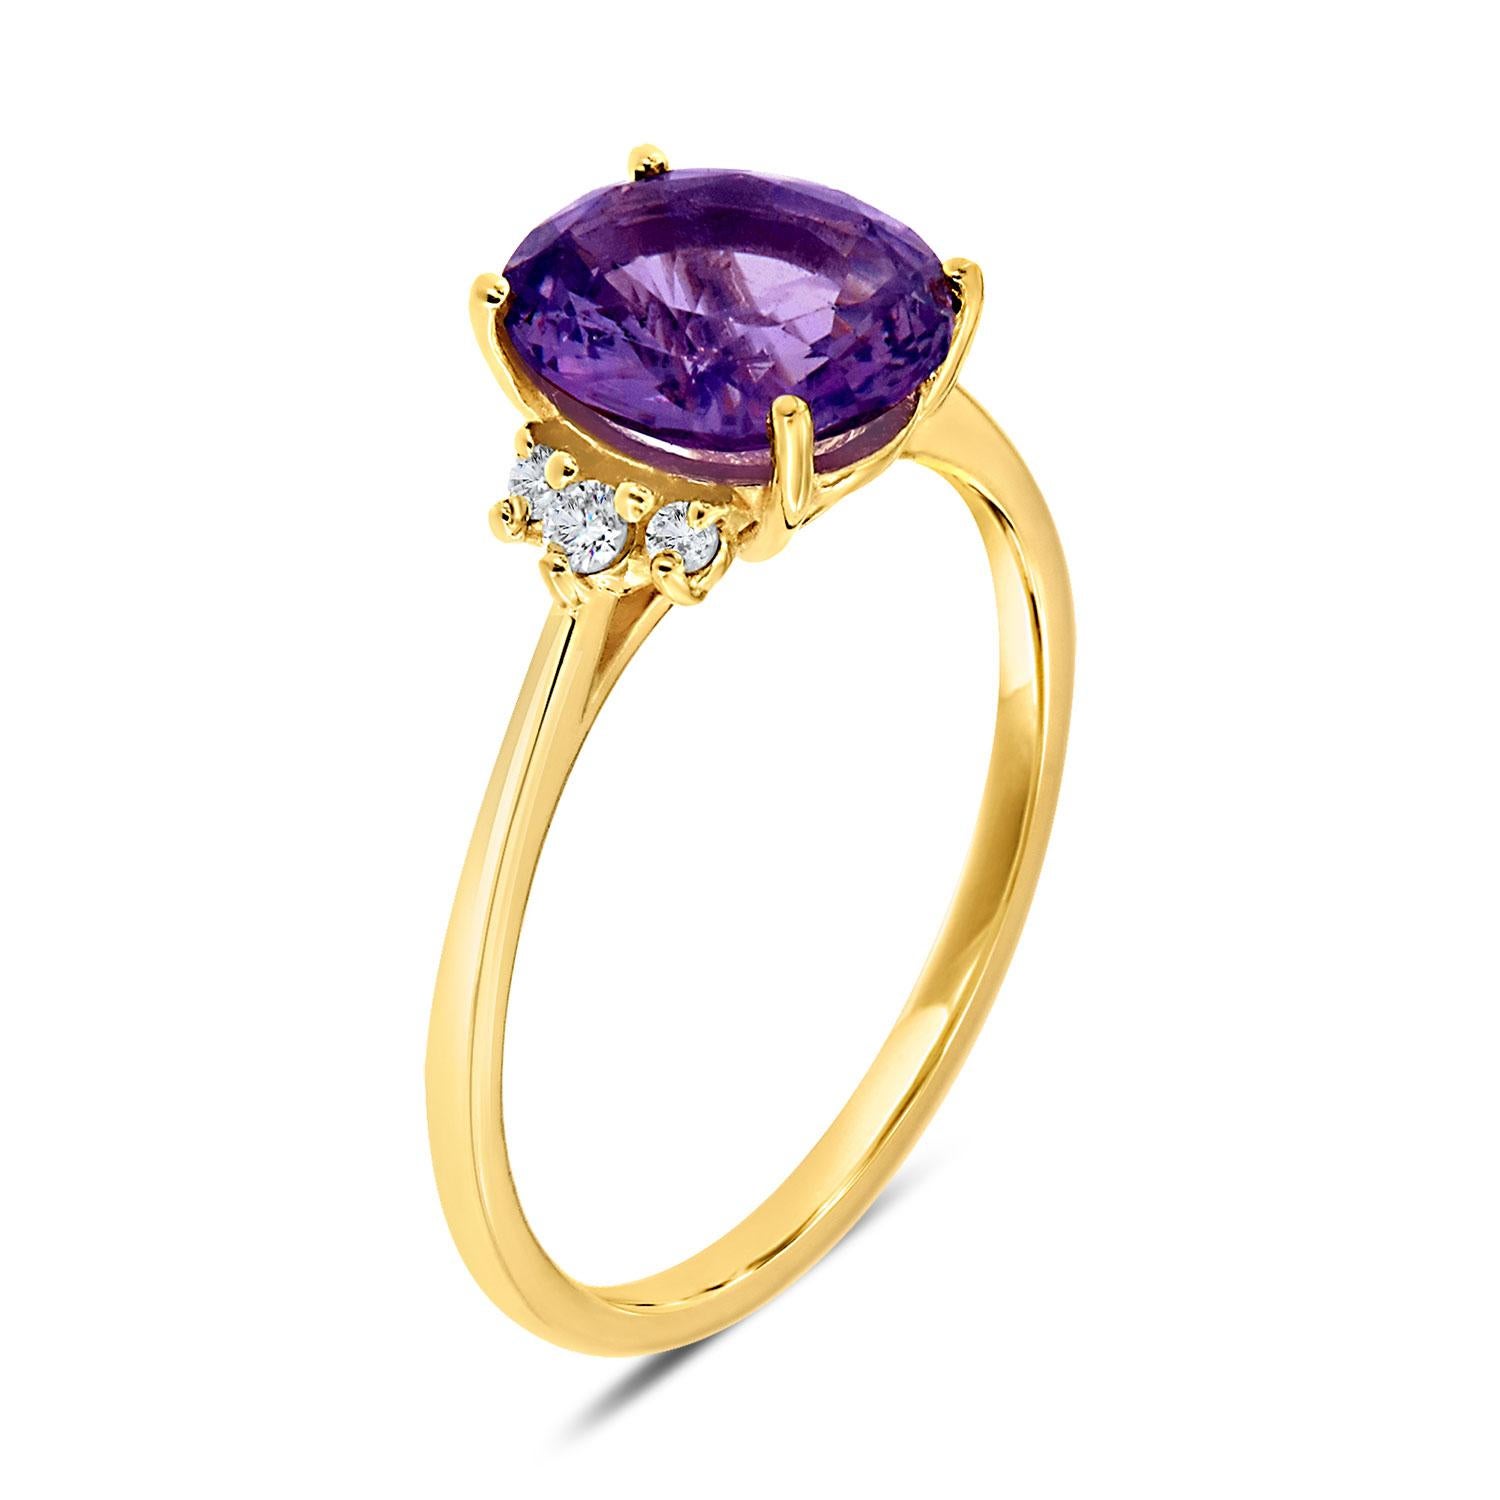 We love this delicate, organically designed ring that features an impressive, perfectly shaped 2.11 Carat Oval-Shaped Unheated Vibrant Pinkish Purple natural Sapphire flanked by a crown of three round diamonds in a total weight of 0.05 Carat. The